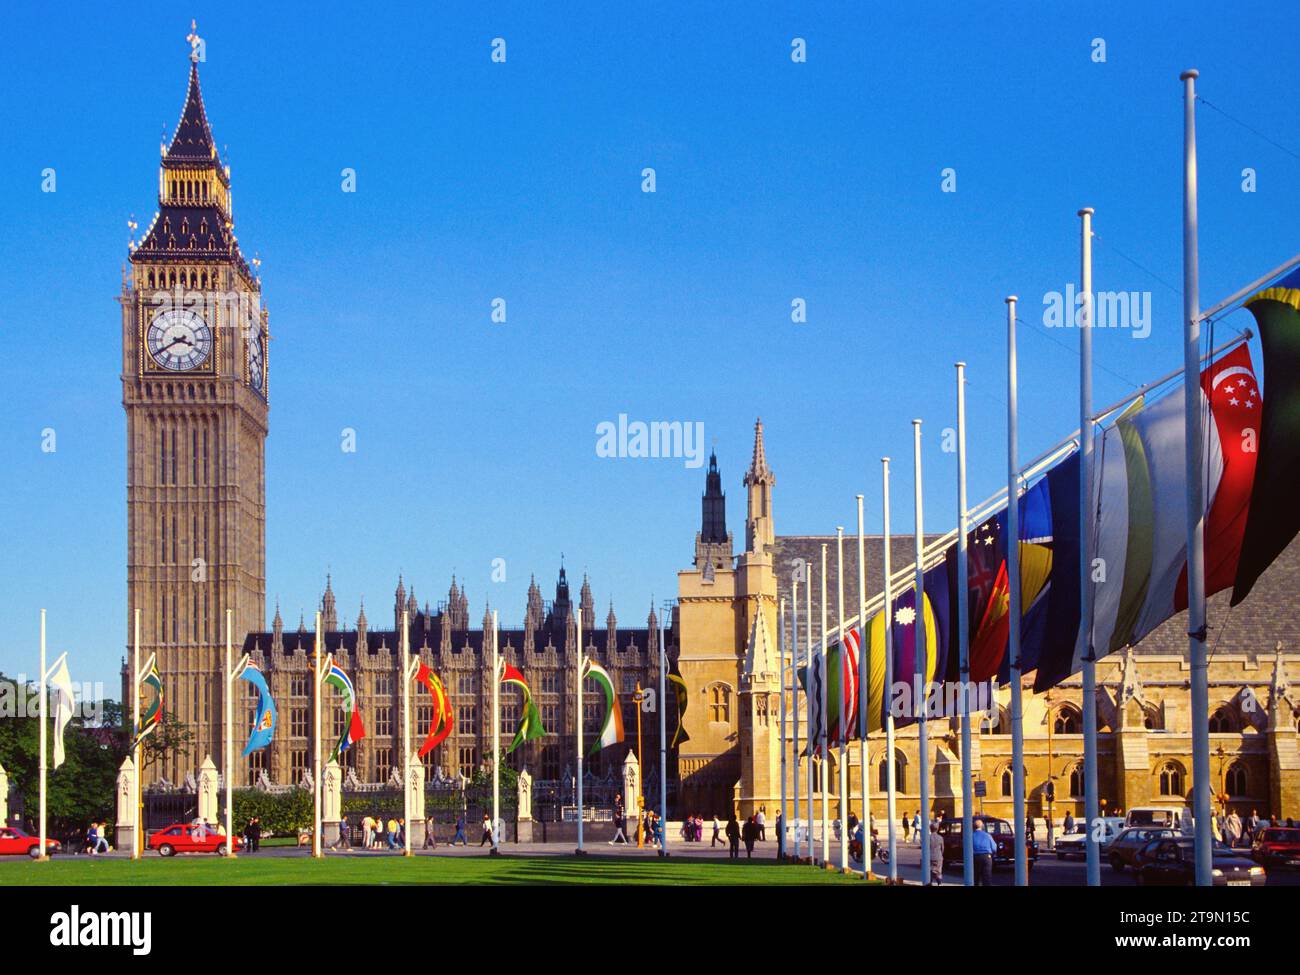 Commonwealth Park. Palace of Westminster. House of Parliament Building. Elizabeth Tower. Big Ben.London, England. Stock Photo